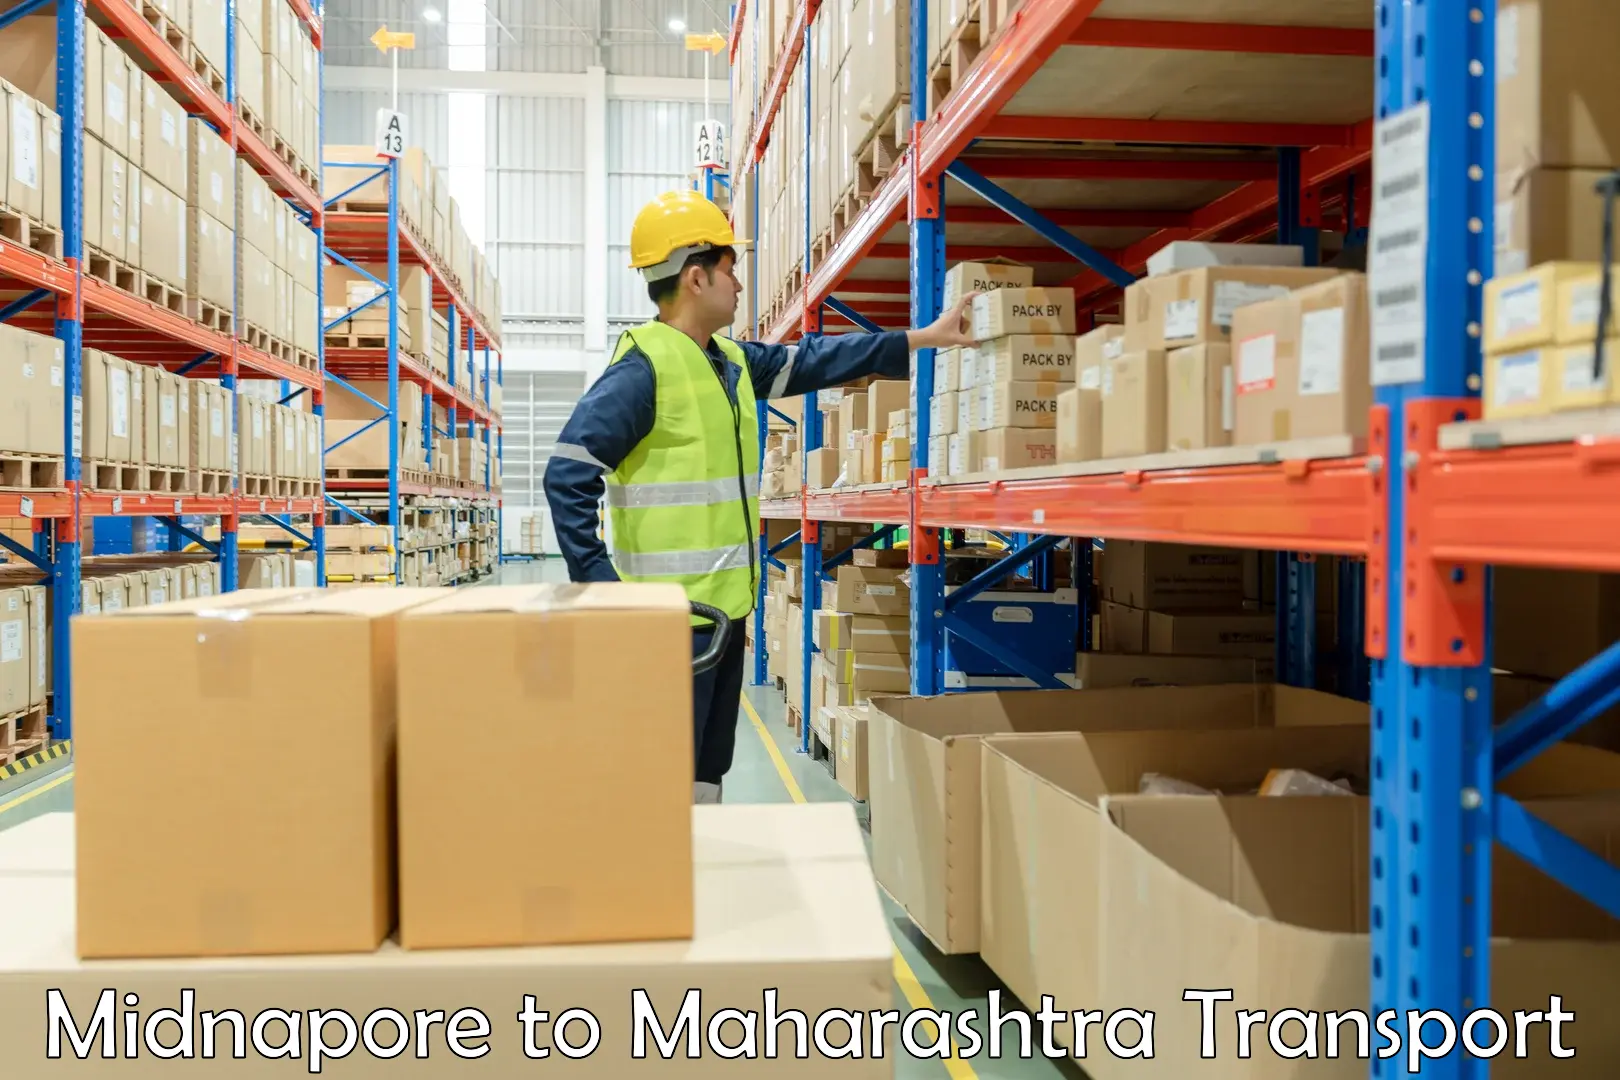 Transport shared services Midnapore to Wai